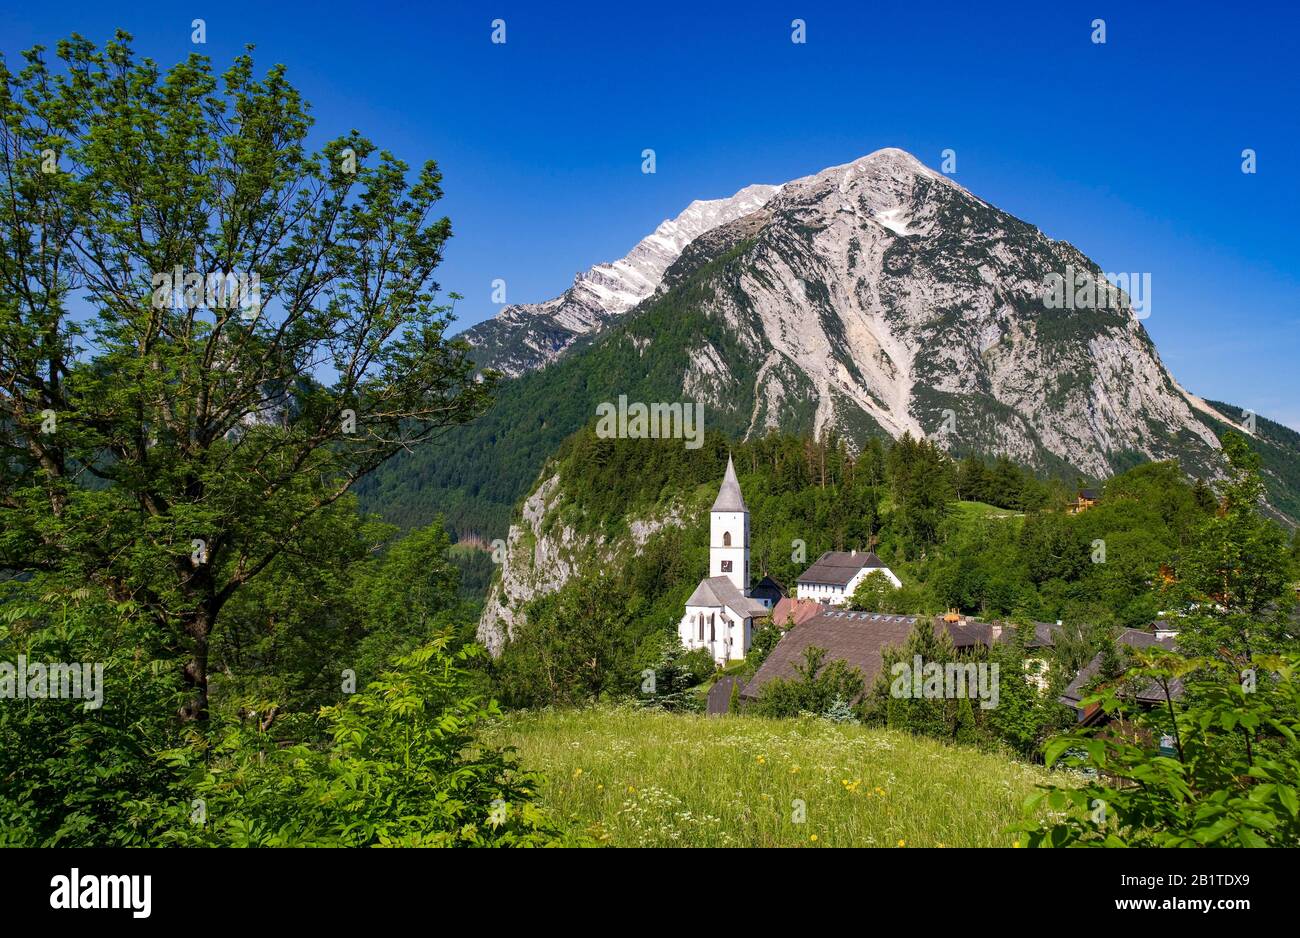 Puergg with Grimming, district of Lienz, Styria, Austria Stock Photo